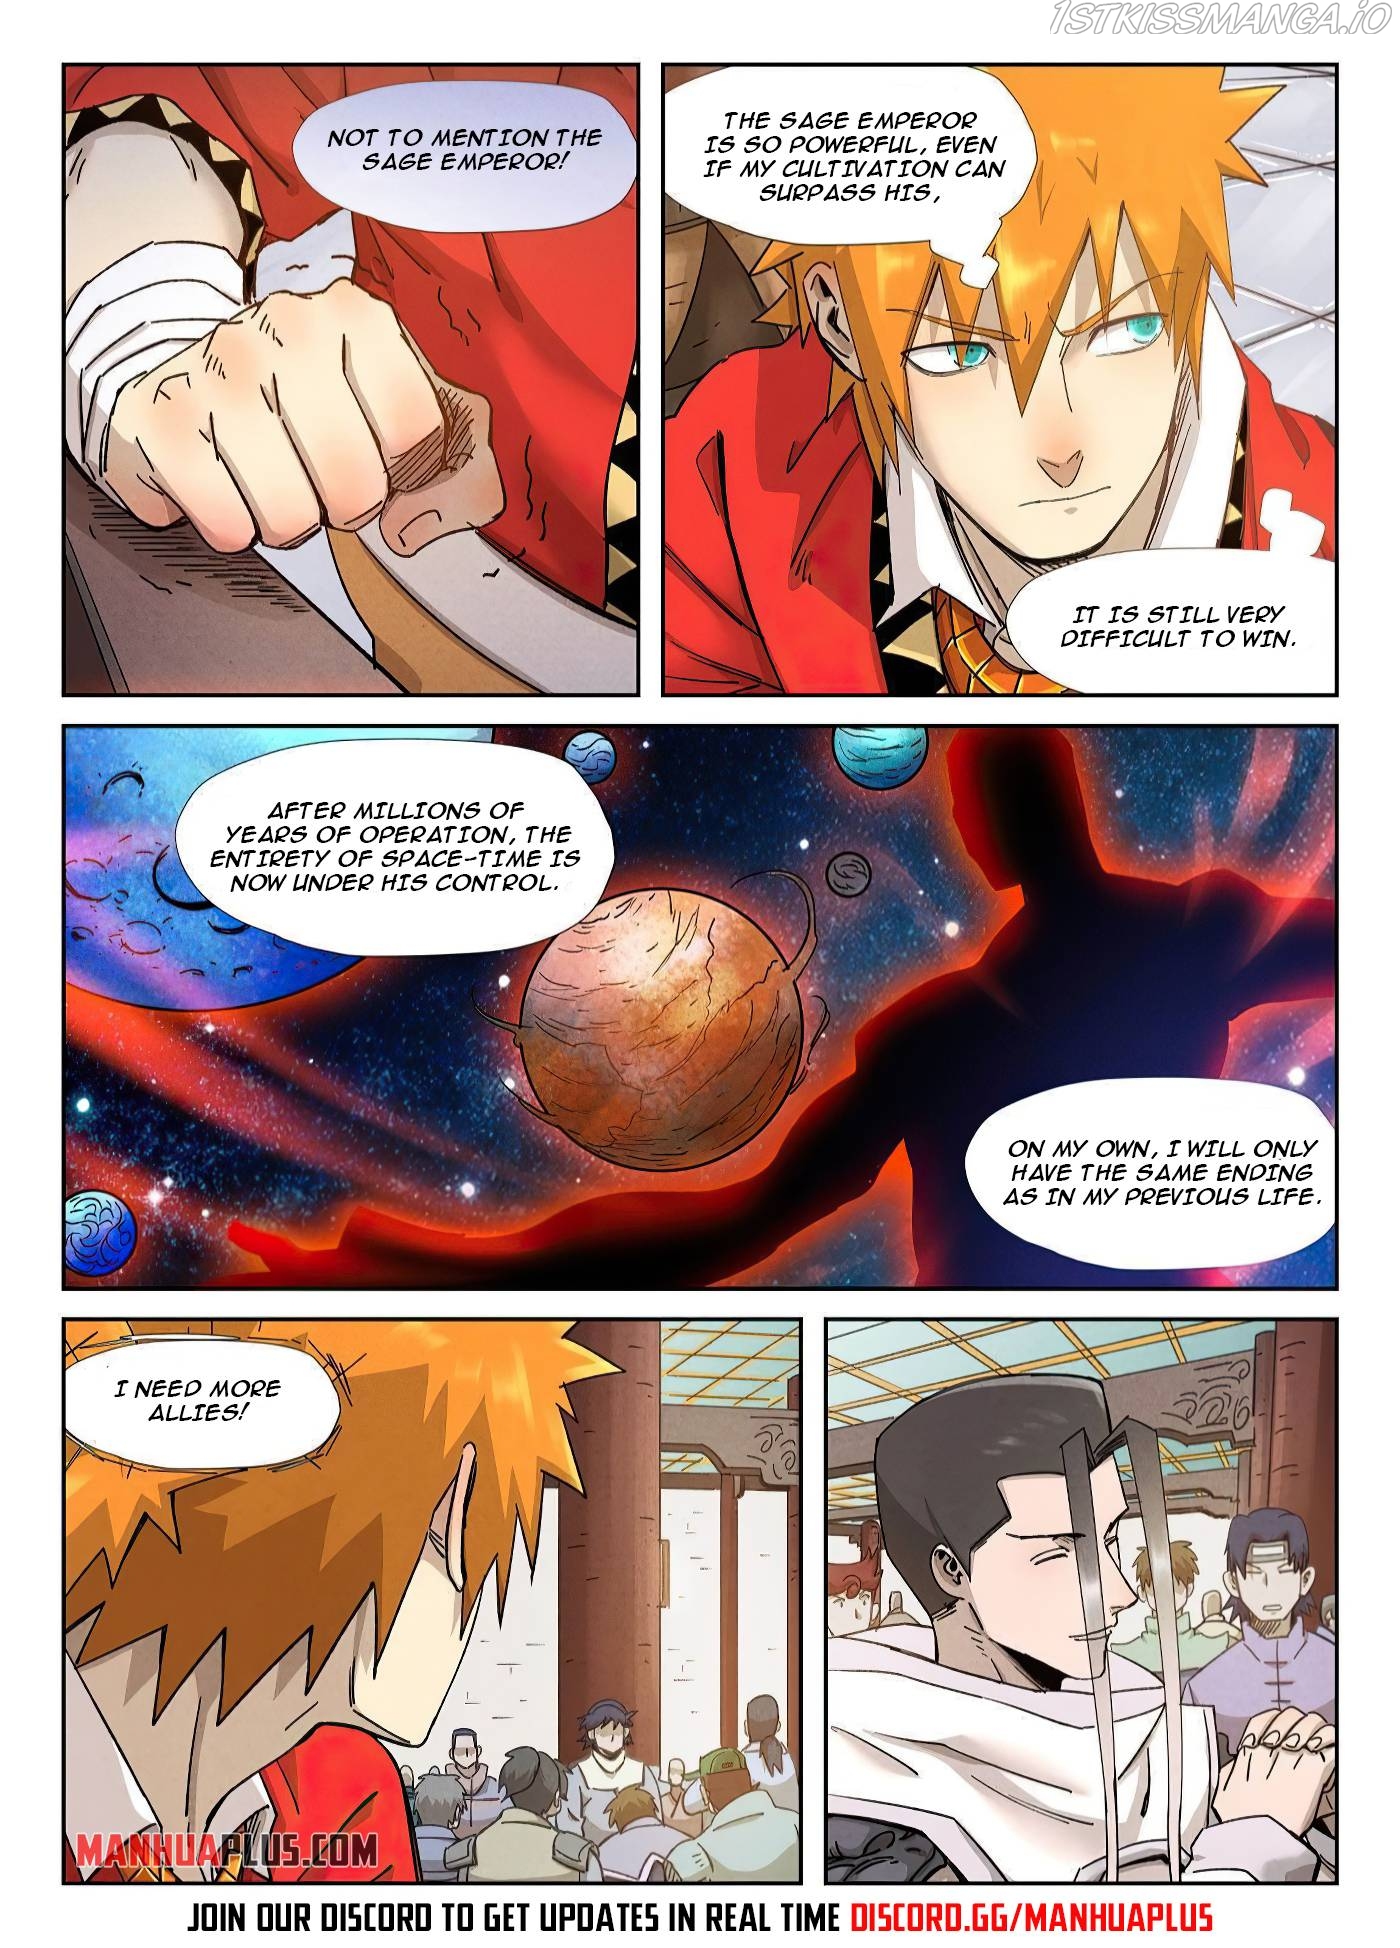 Tales of Demons and Gods Manhua Chapter 336.1 - Page 2